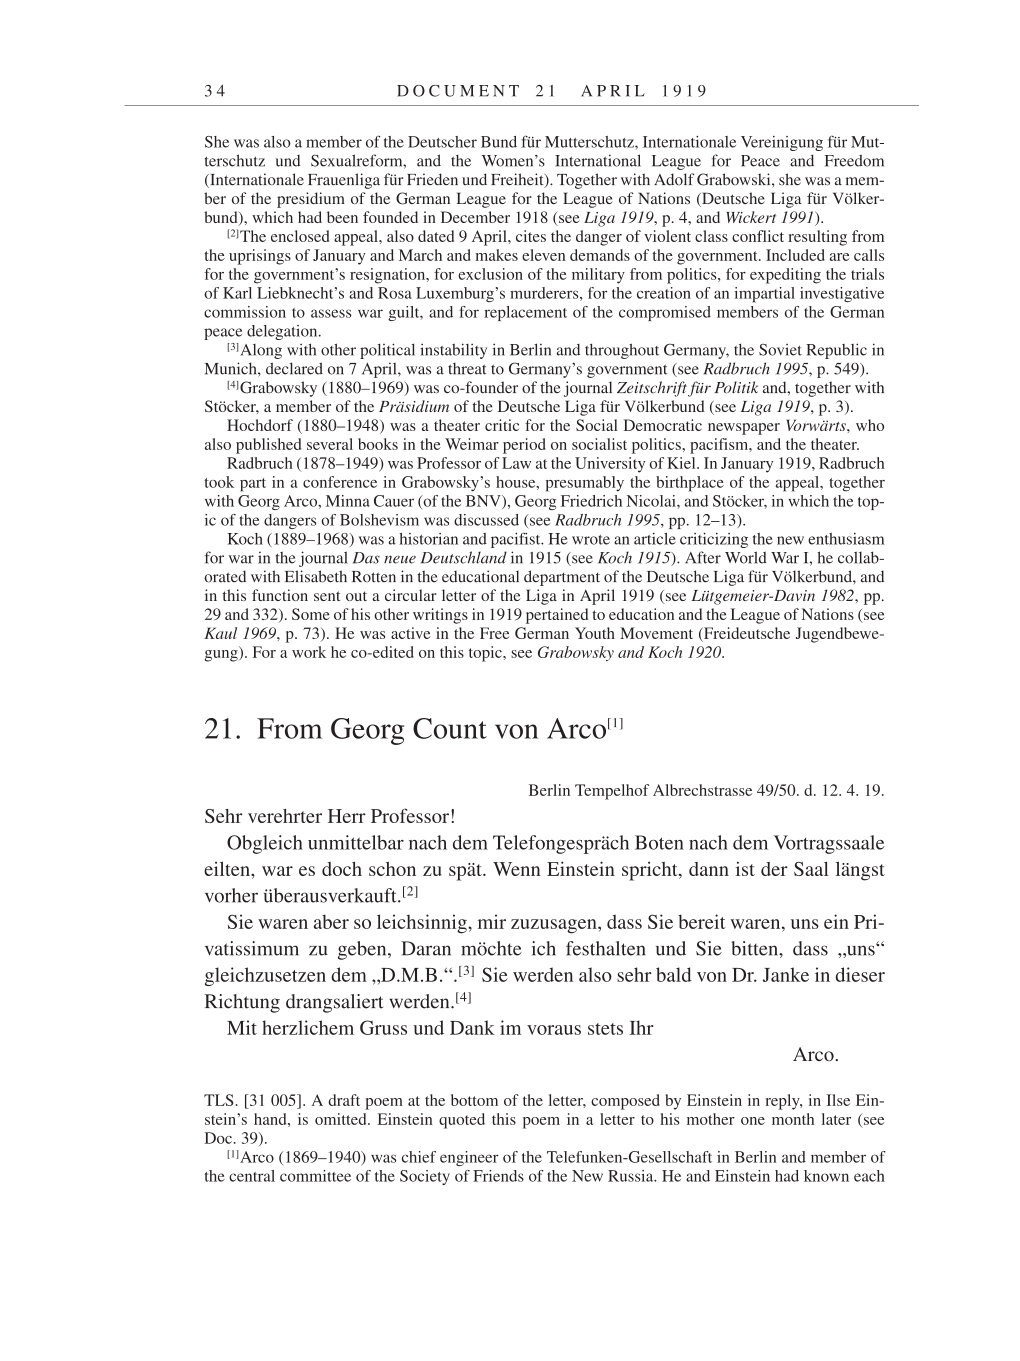 Volume 9: The Berlin Years: Correspondence January 1919-April 1920 page 34